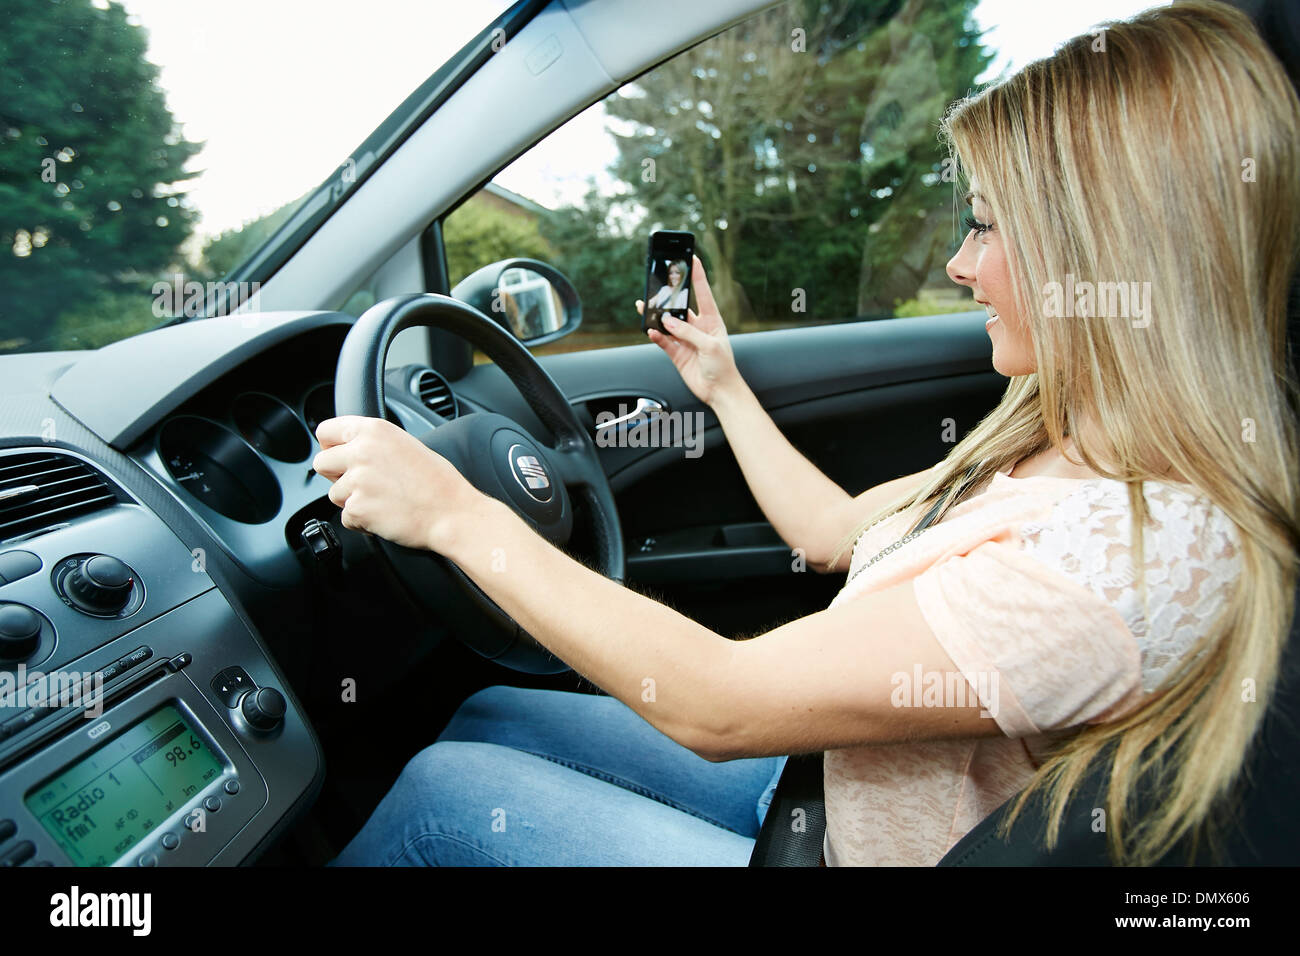 Girl taking picture of herself whilst driving Stock Photo